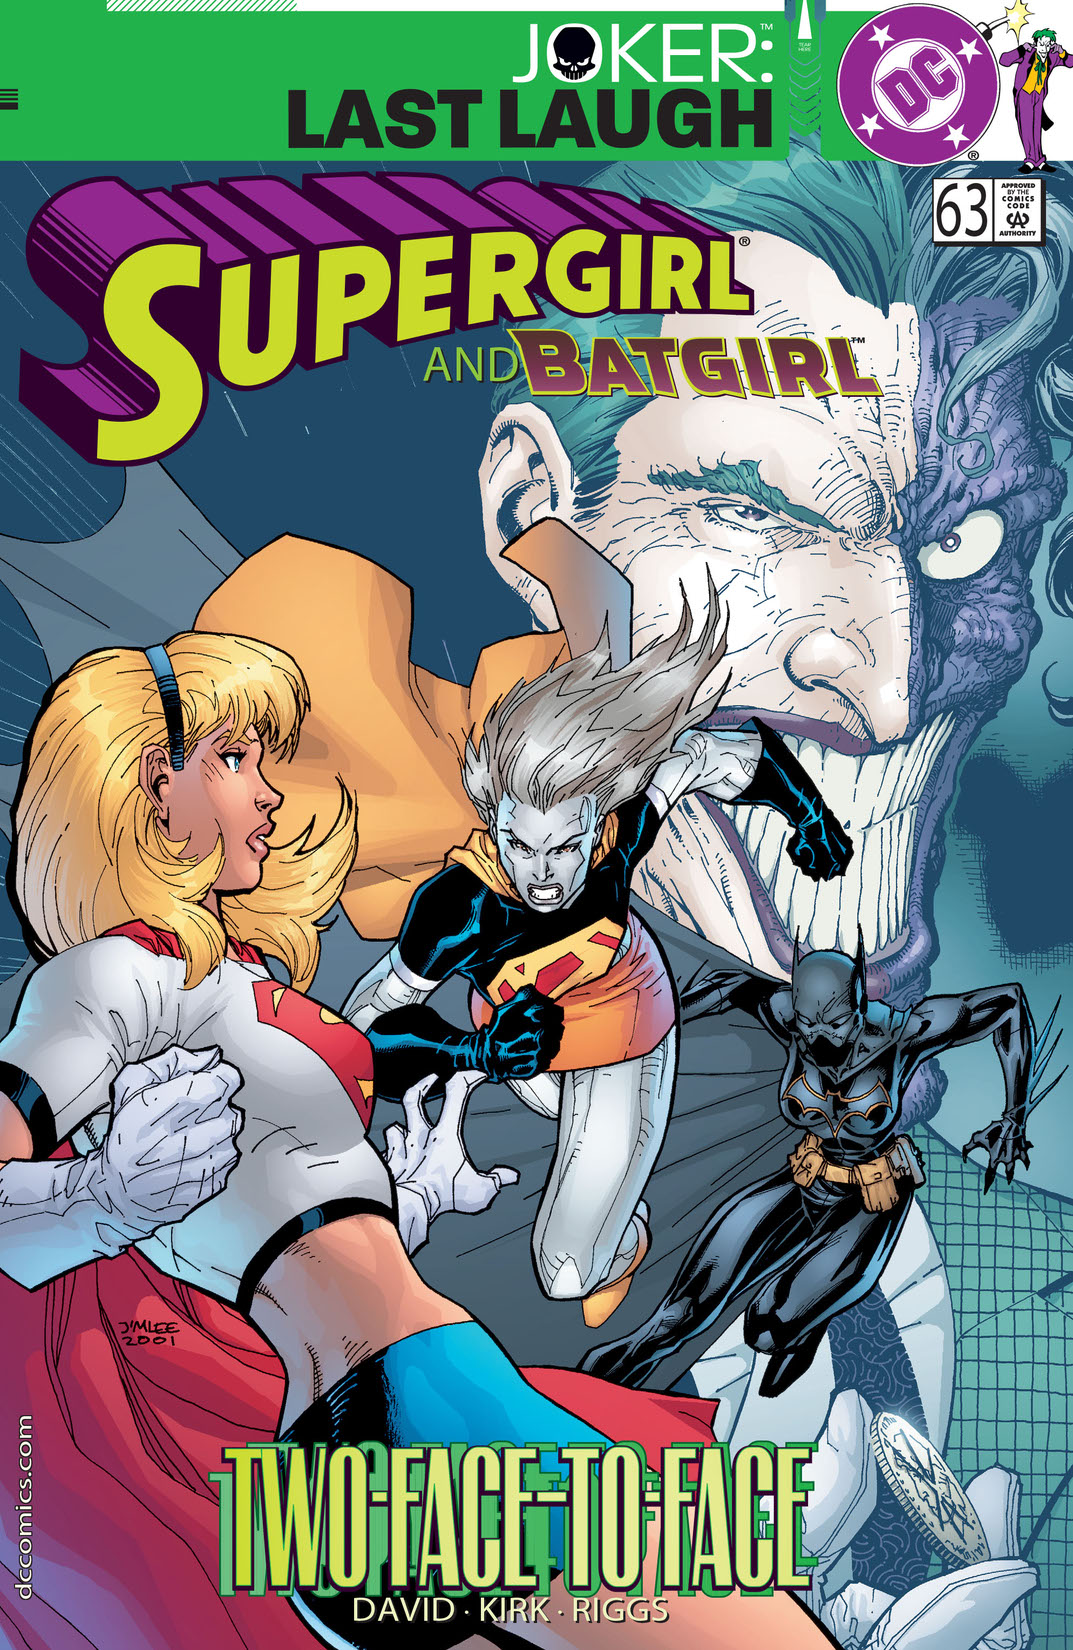 Supergirl (1996-) #63 preview images